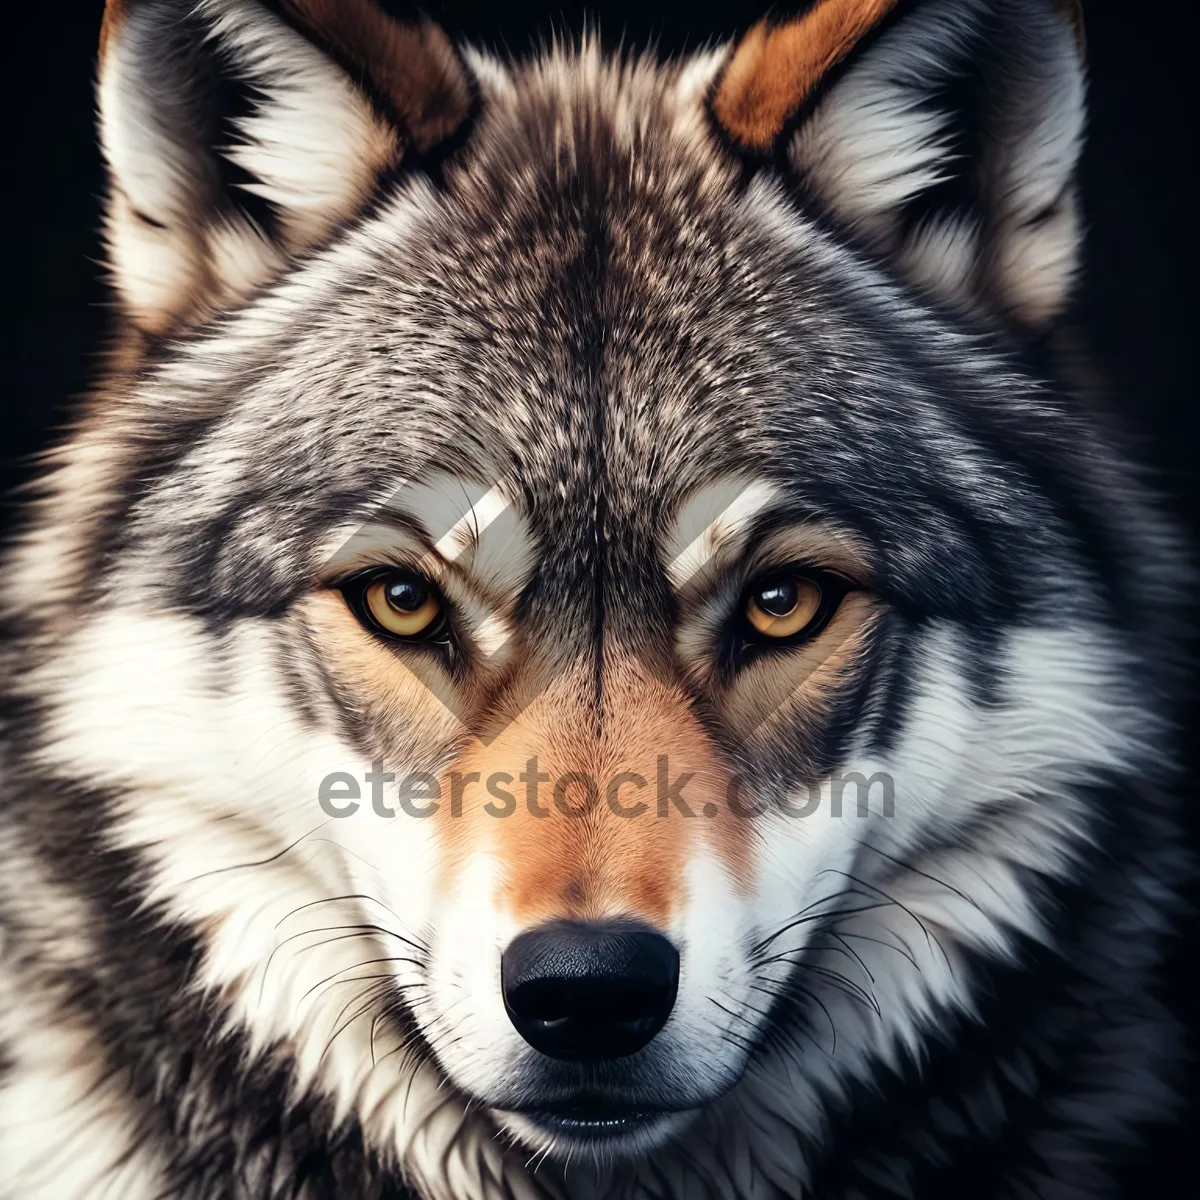 Picture of Majestic Canine Portrait: Wild Timber Wolf with Piercing Eyes